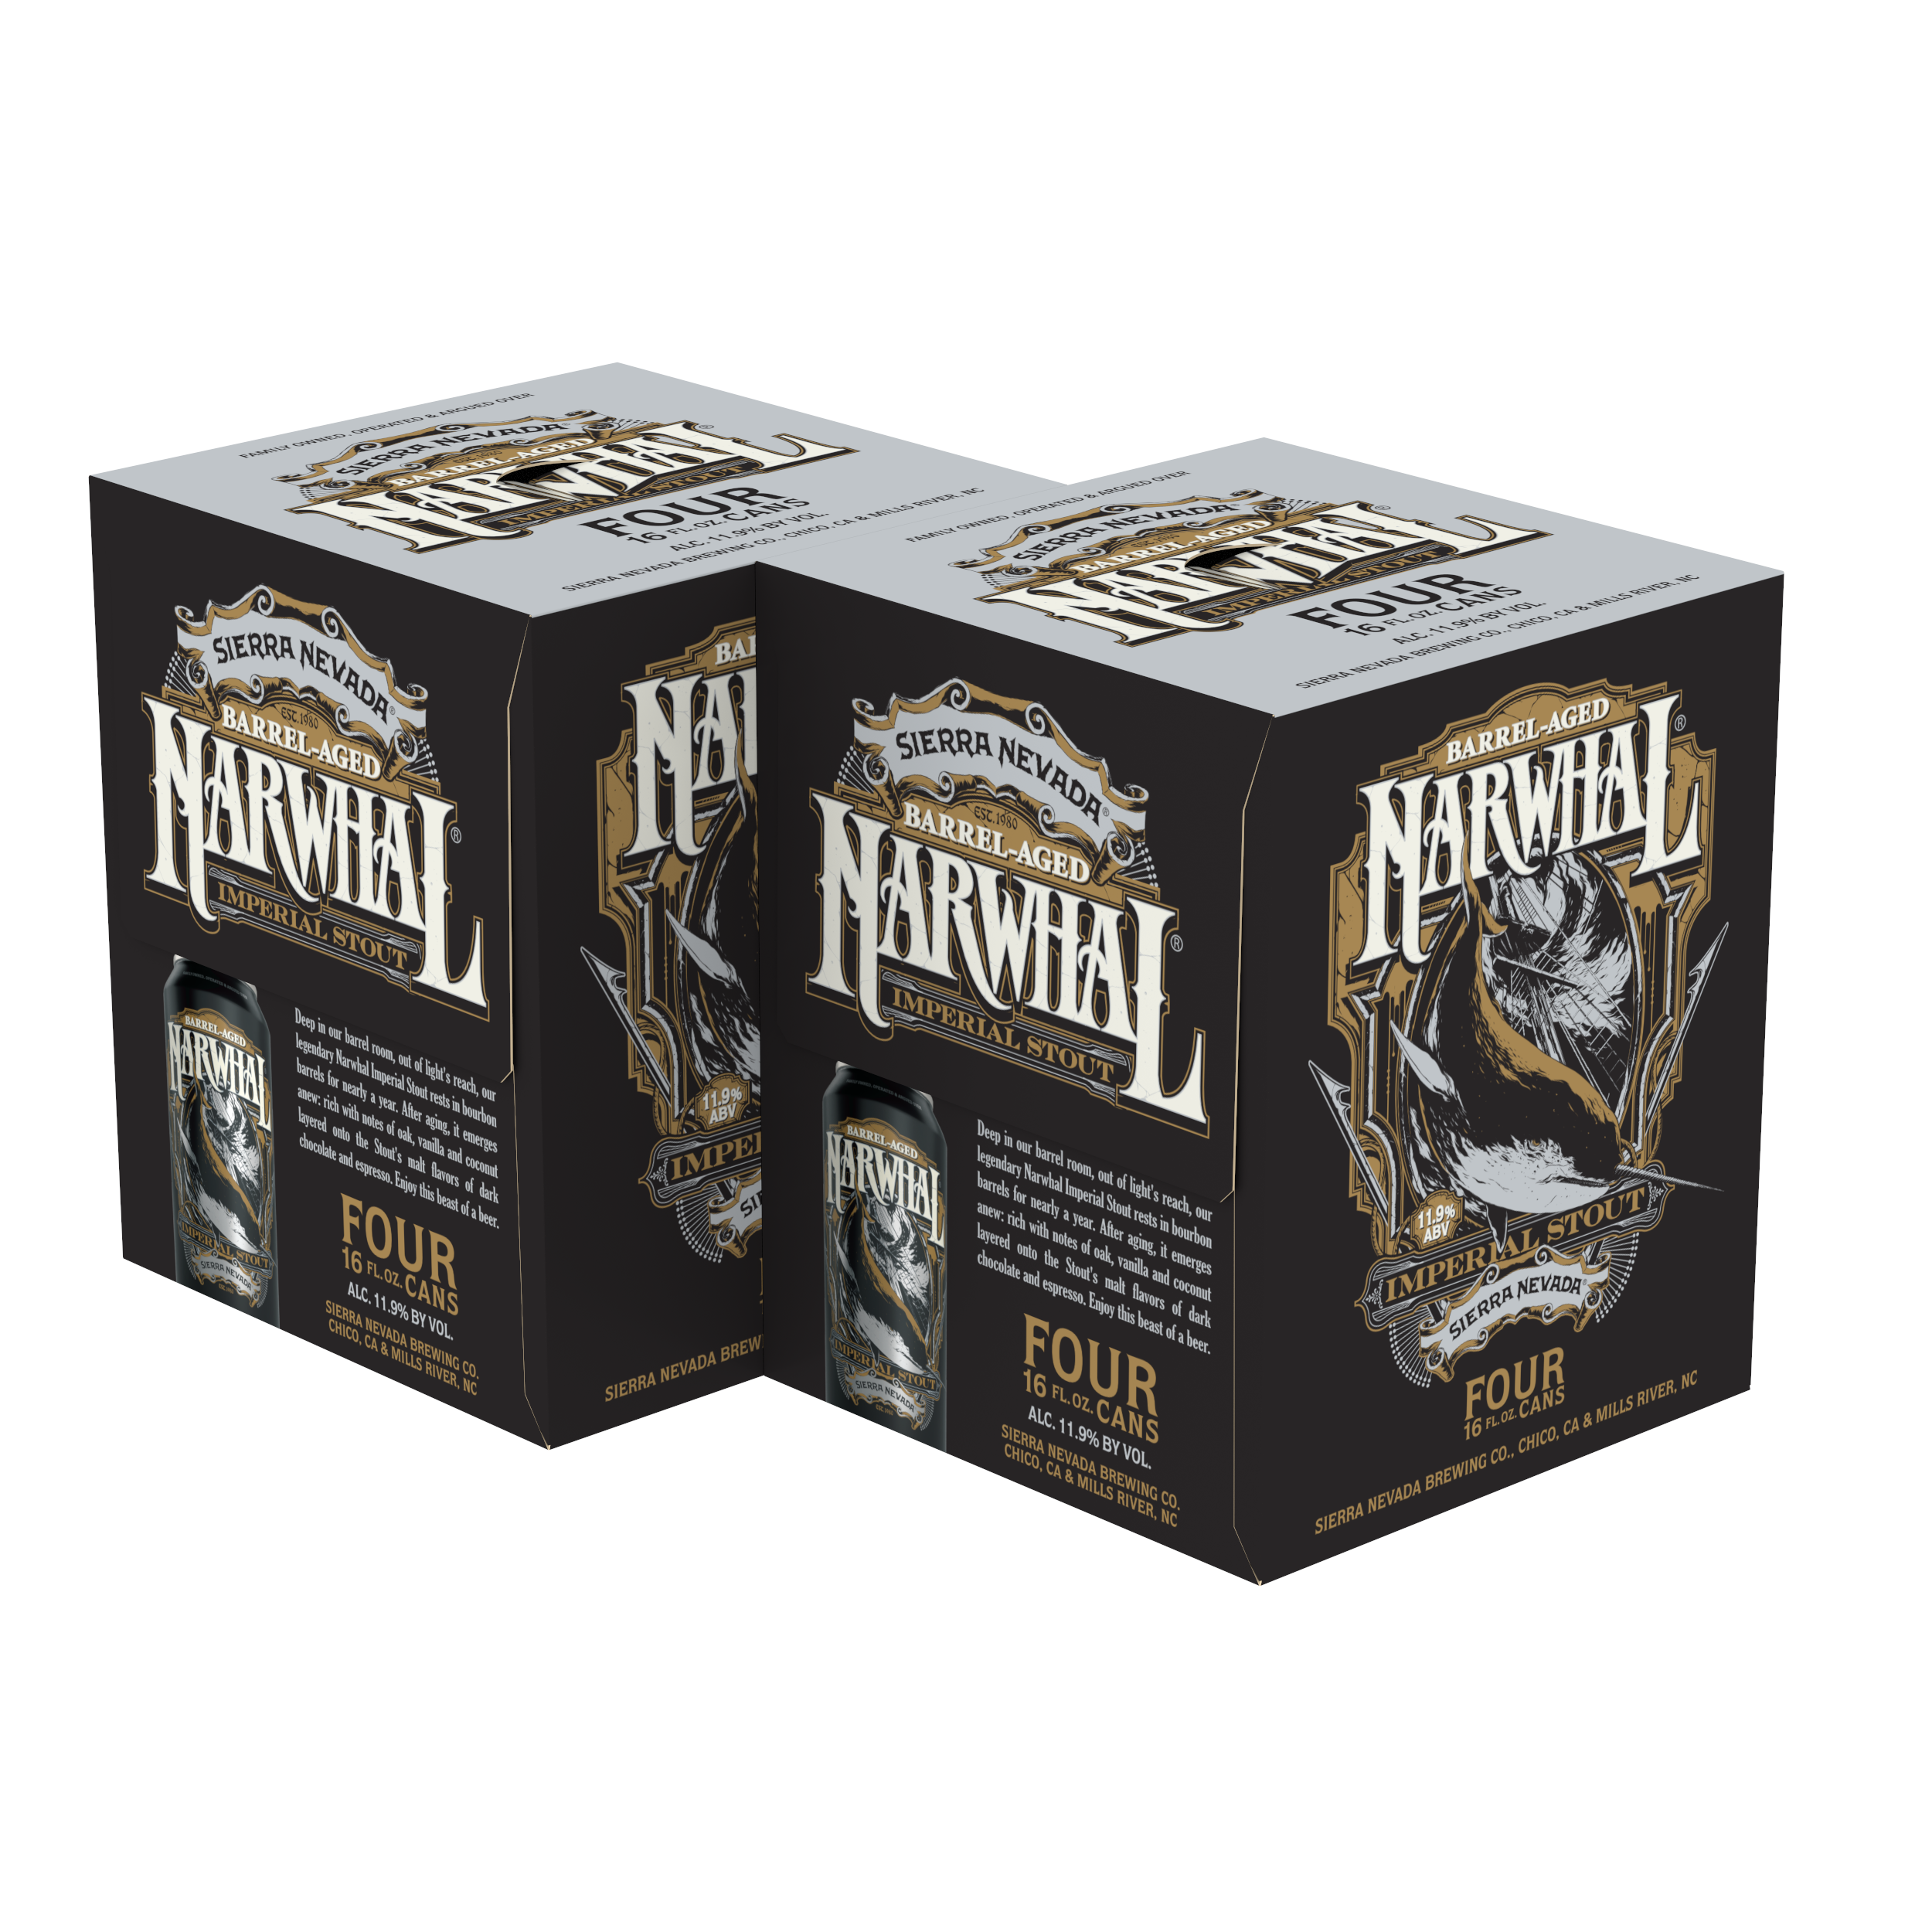 Sierra Nevada Brewing Co. Barrel Aged Narwhal 8-Pack